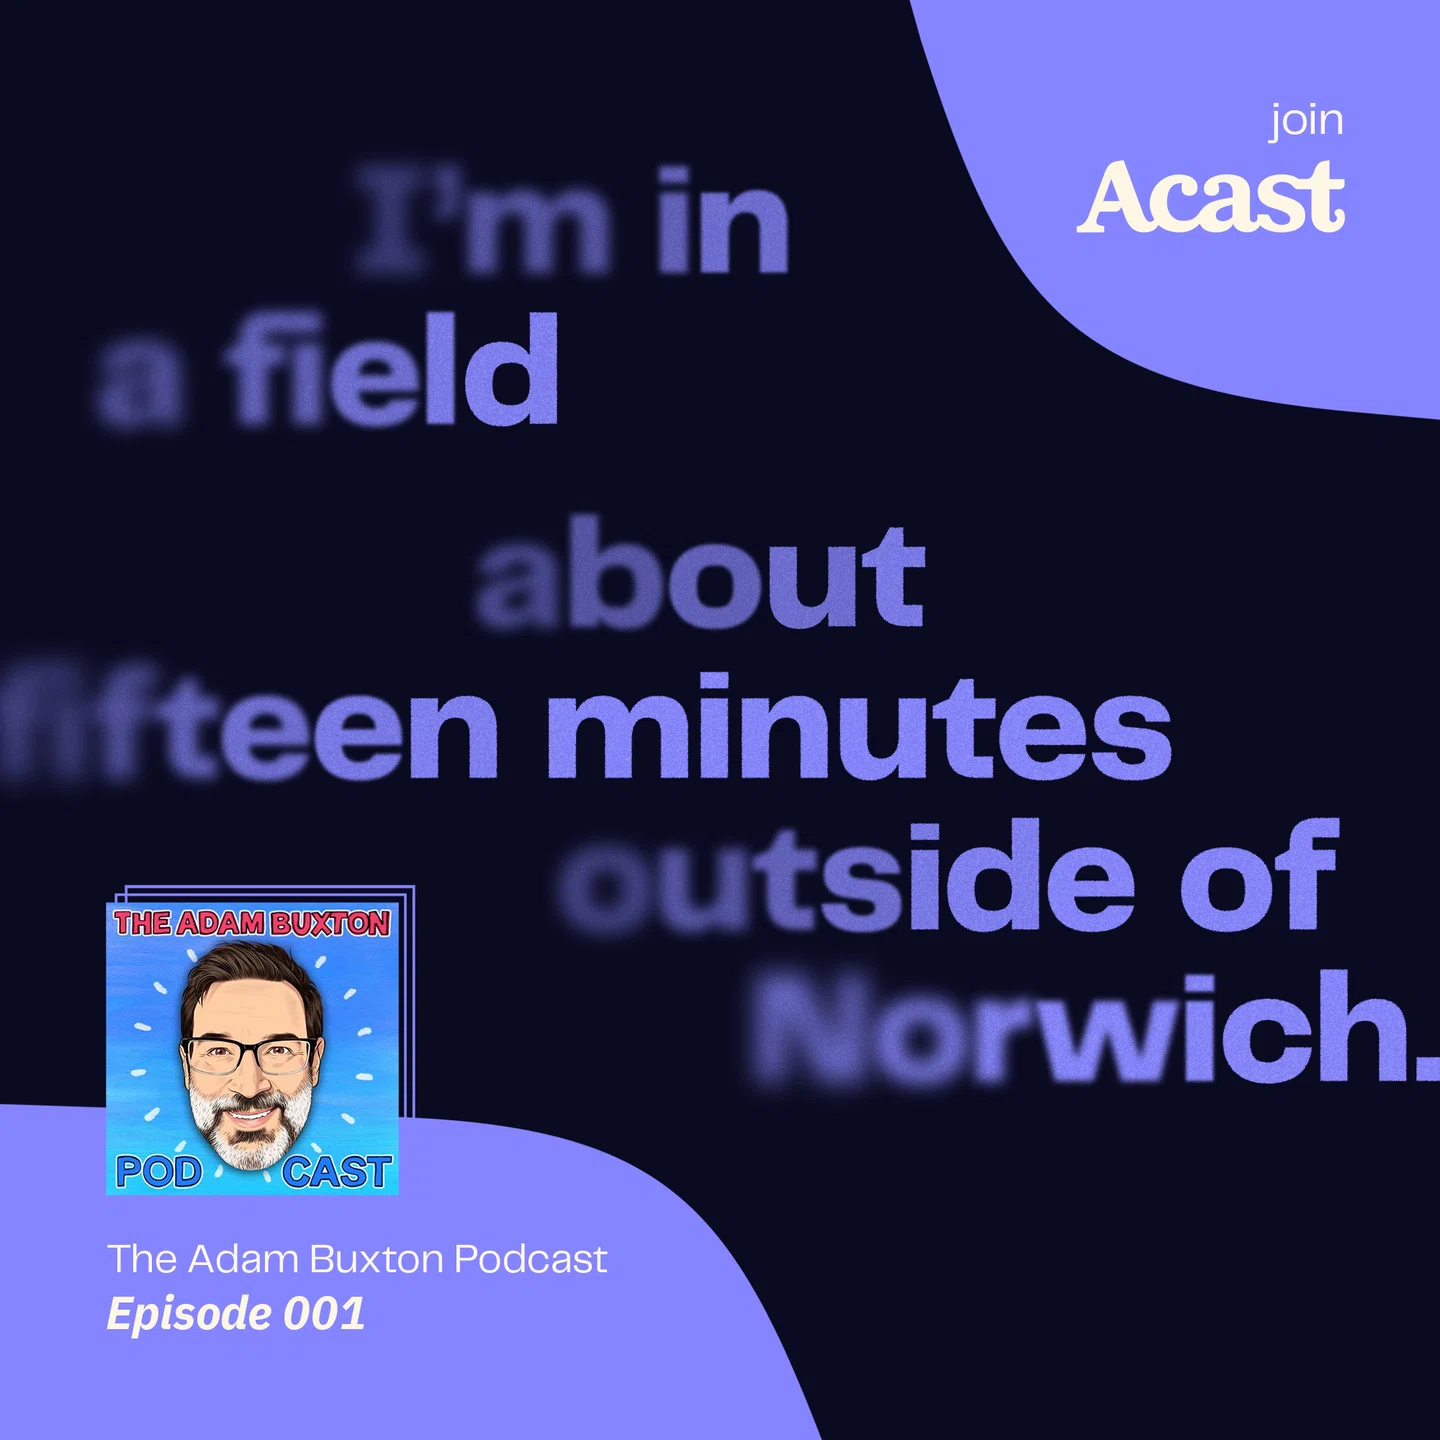 acast-first-words-campaign-graphic-design-itsnicethat-05.jpg